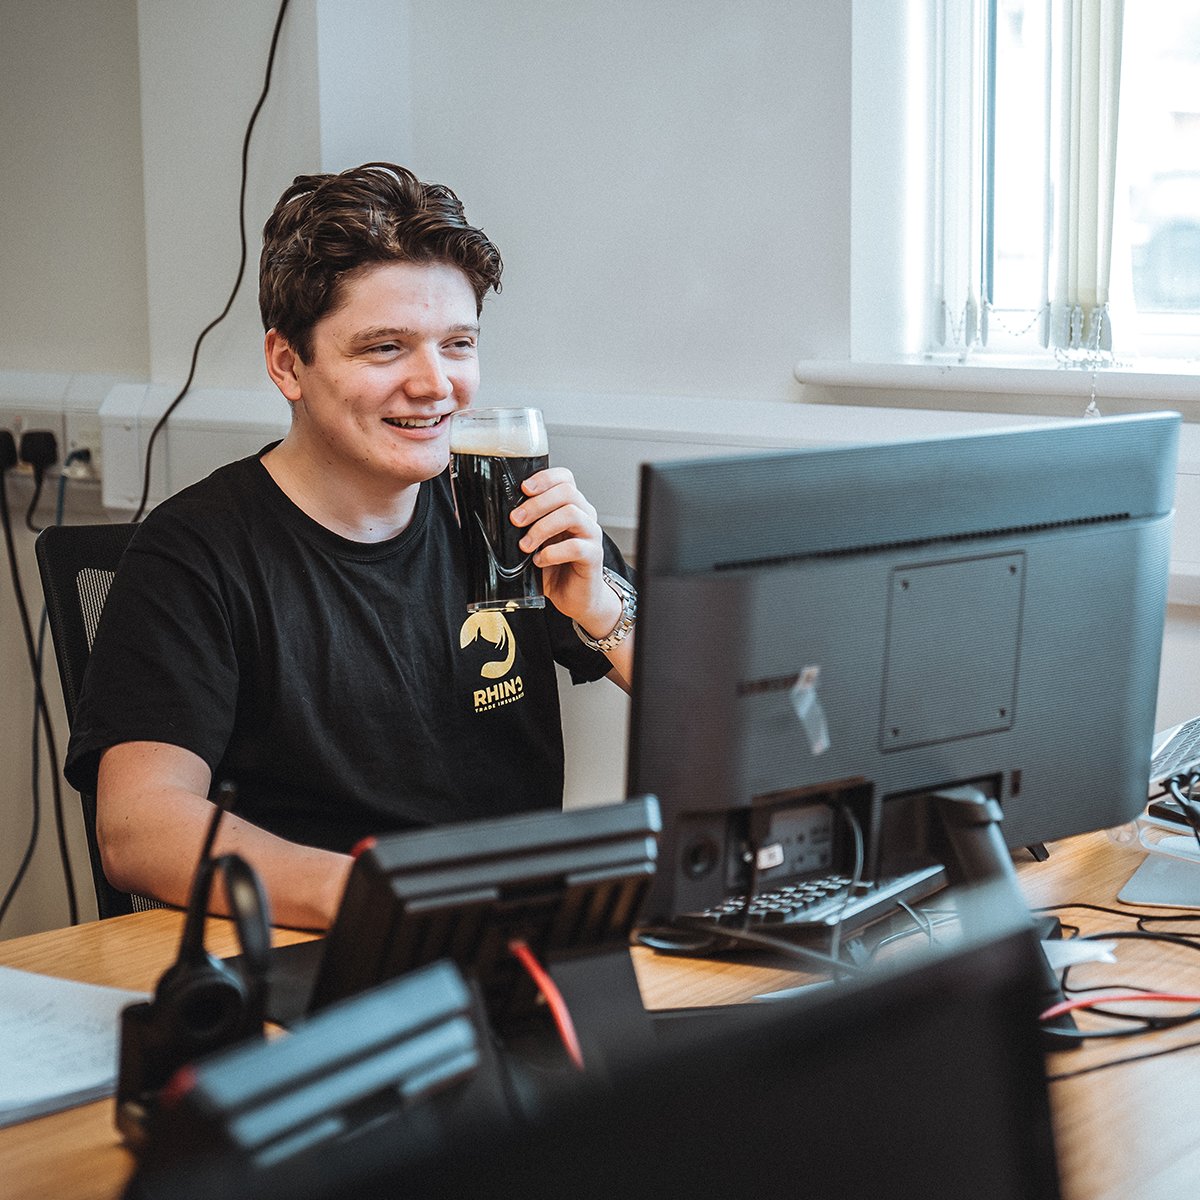 A day in the life at the Rhino office 🔥 Swipe to the end for a surprise 👀 rhinotradeinsurance.com (Disclaimer: Ed doesn't actually drink on the job - He was enjoying leftover 0% Guinness from our St Patrick's Day video 😅) #tradeinsurance #officelife #tradespeople